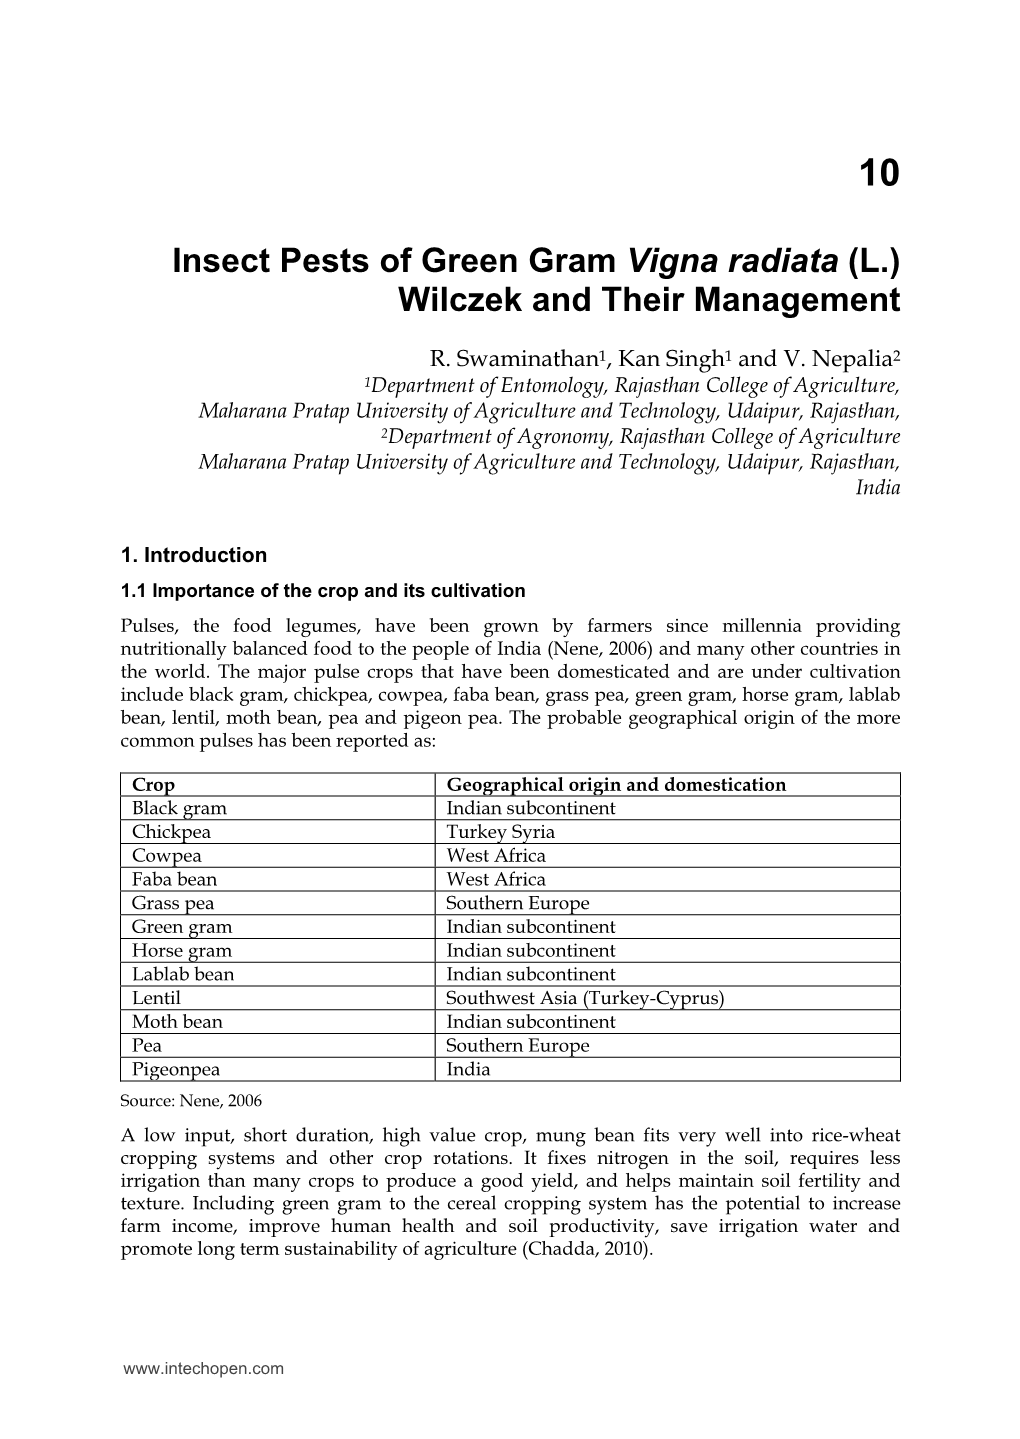 Insect Pests of Green Gram Vigna Radiata (L.) Wilczek and Their Management